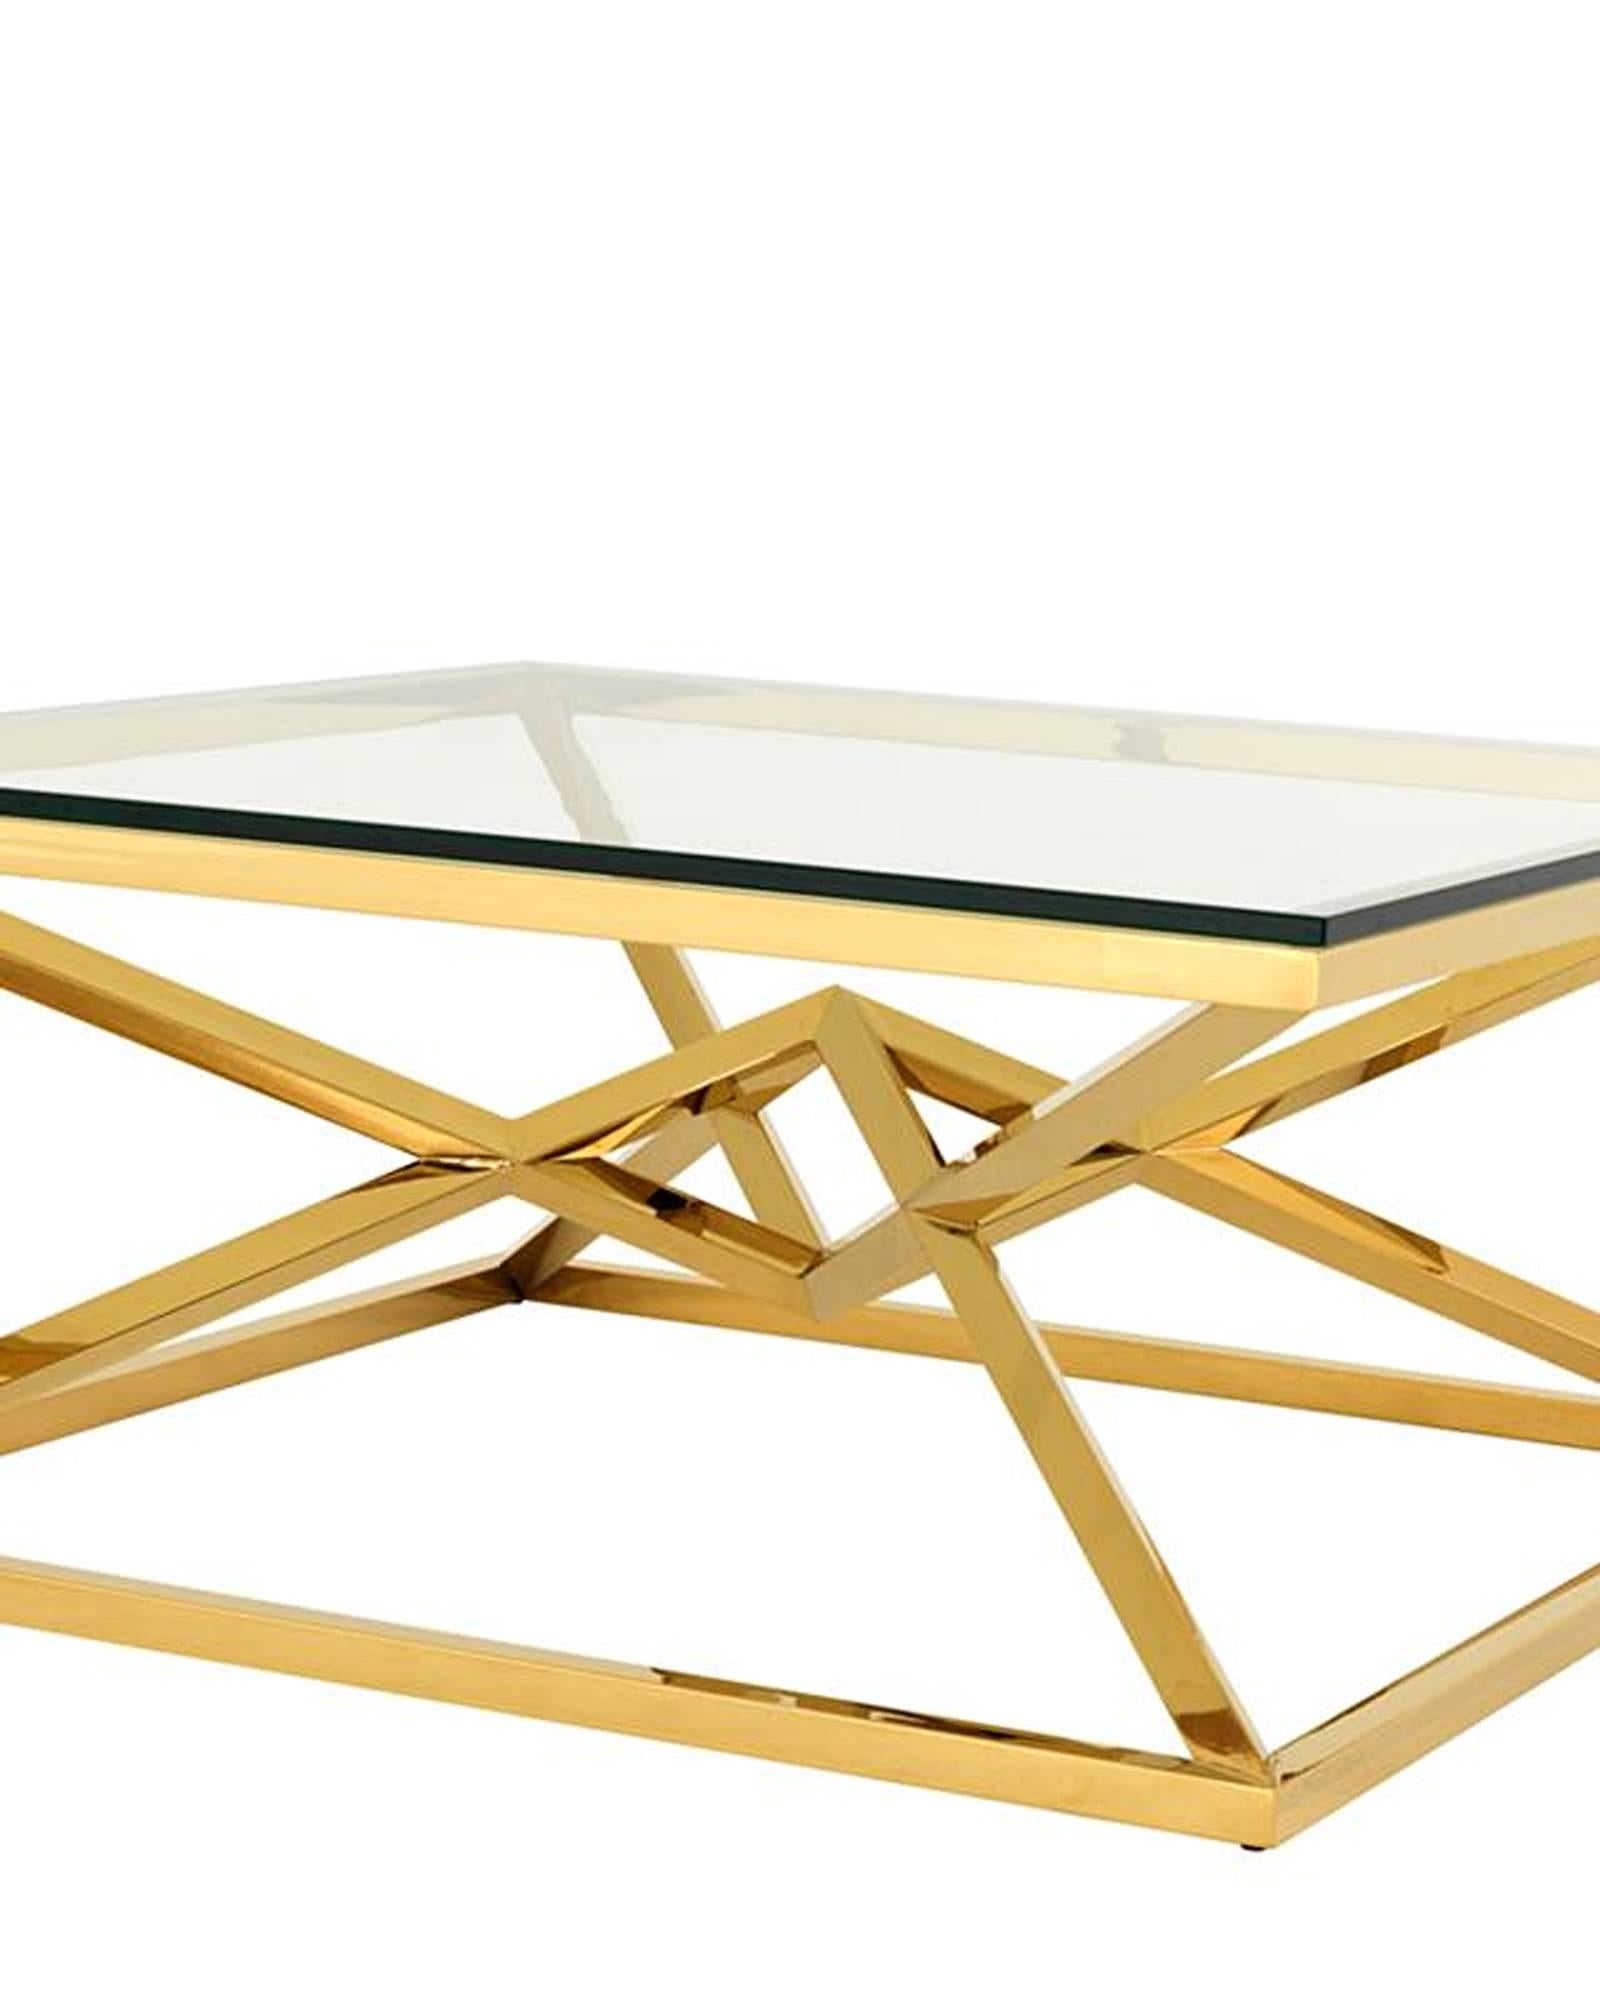 Coffee table Equis with gold finish structure
and clear glass top. Available in polished
stainless steel or bronze finish.
 